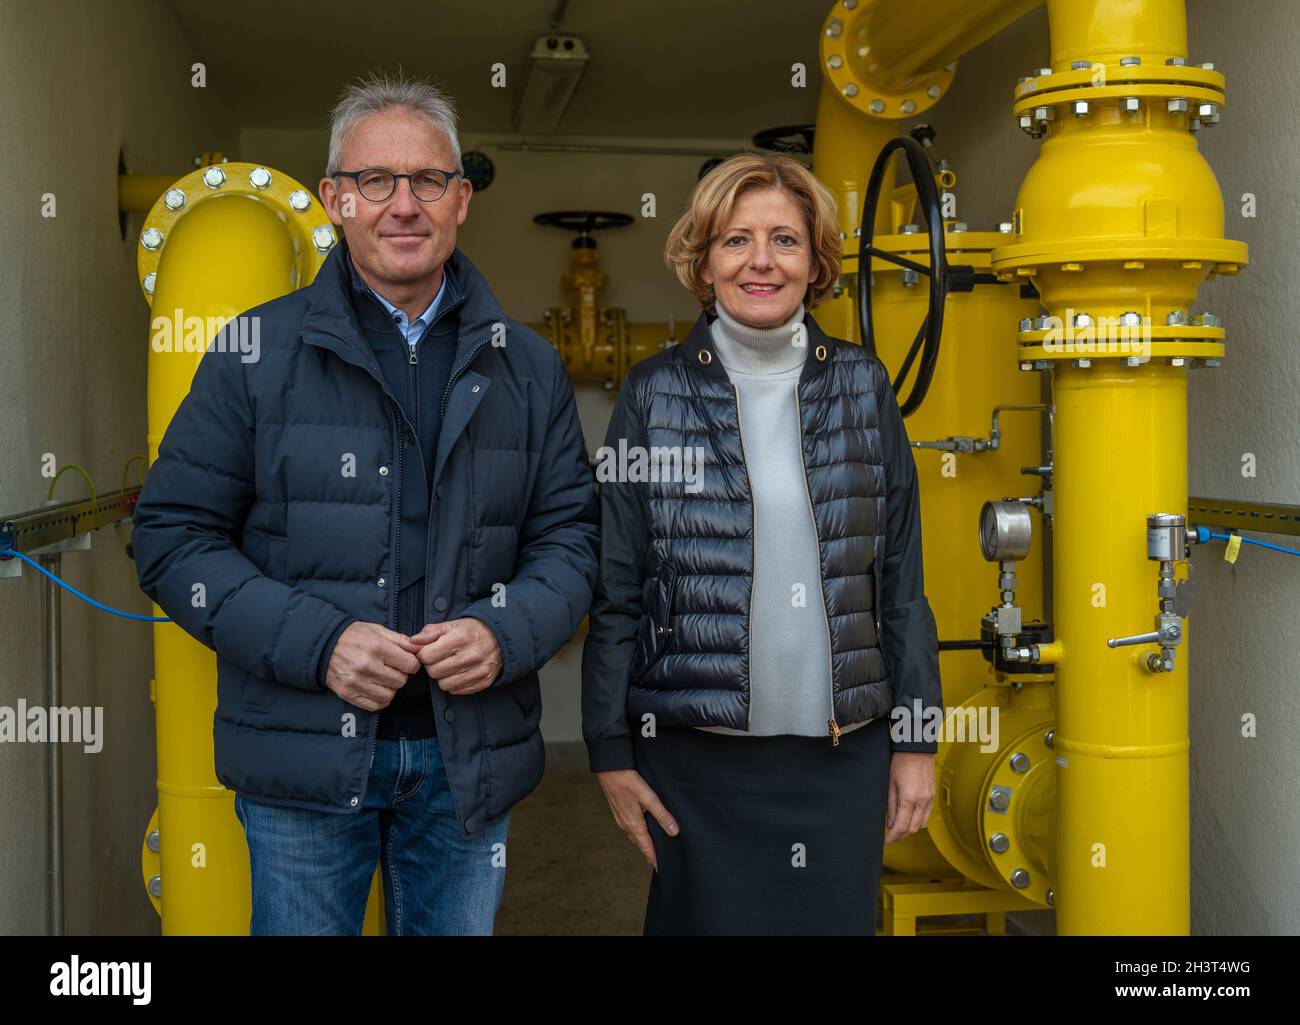 Bad Neuenahr Ahrweiler, Germany. 29th Oct, 2021. The Minister President of Rhineland-Palatinate, Malu Dreyer (r, SPD) and Andreas Hoffknecht (Managing Director of Energienetze Mittelrhein) stand at the gas pressure regulating station during the commissioning of an important high-pressure gas pipeline to supply heat to the new gas pipeline, which was built as an important high-pressure gas pipeline to supply heat to the Ahr valley after the flood disaster. Credit: Harald Tittel/dpa/Alamy Live News Stock Photo